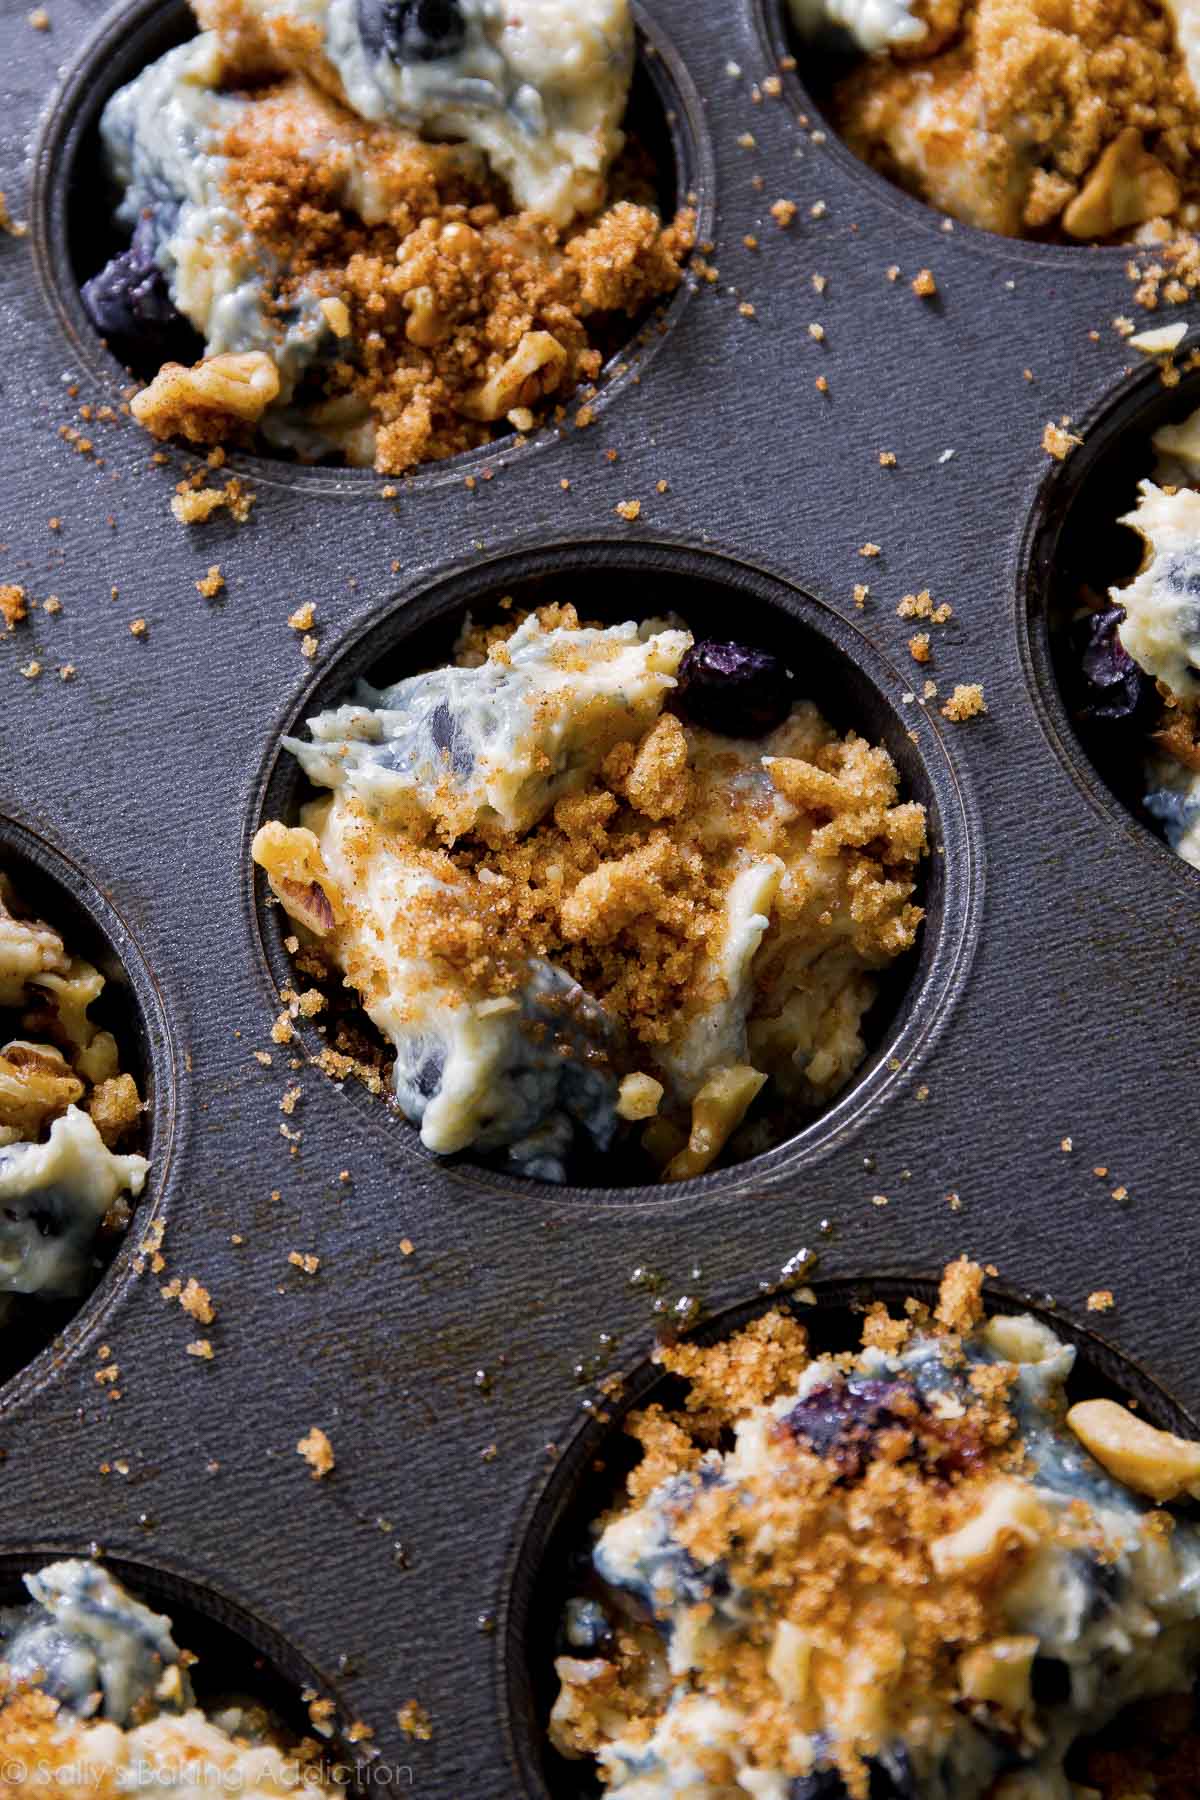 Blueberry muffin batter in muffin pan with streusel topping